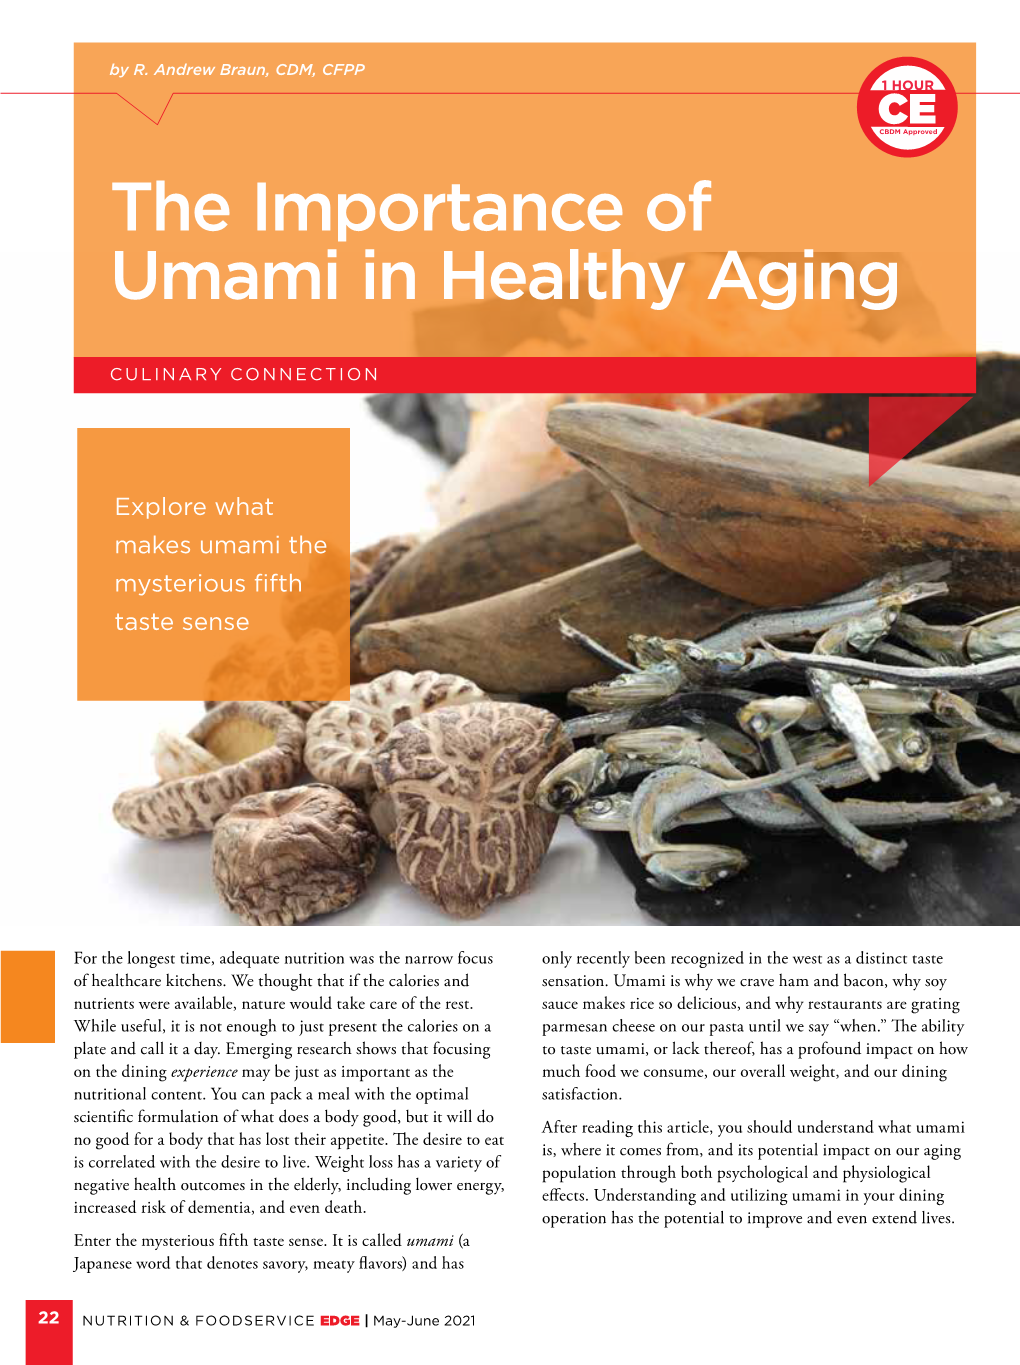 The Importance of Umami in Healthy Aging